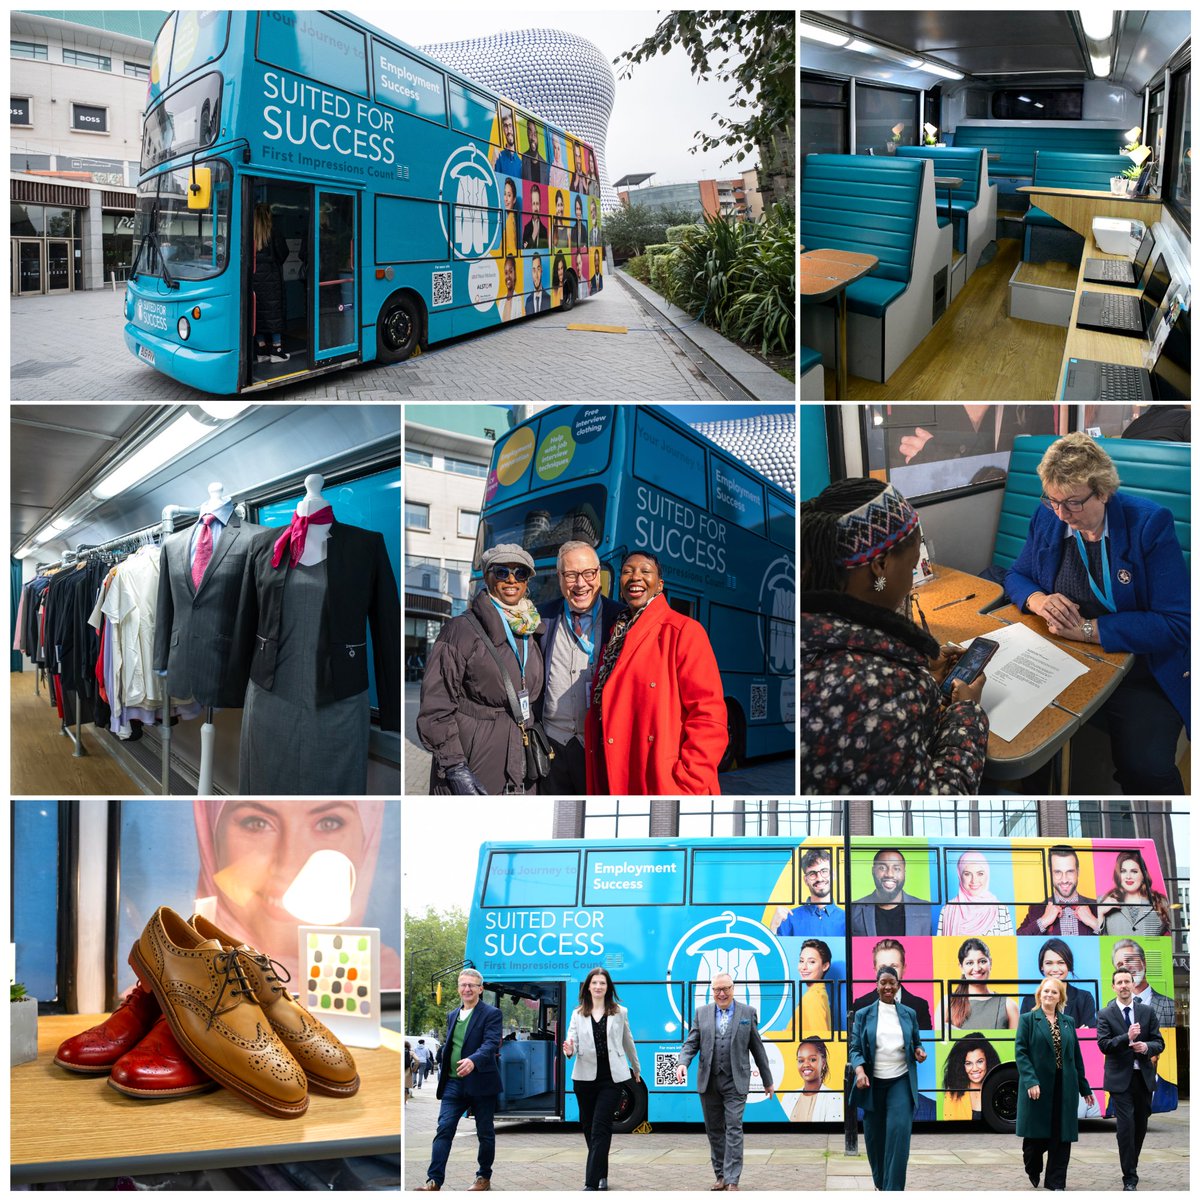 An AMAZING week launching our new employment bus that will take our support into communities across West Midlands supporting the unemployed into employment. Donate to our Get Onboard fundraising campaign raising funds for our first 6 months on the road. bit.ly/49daYKy